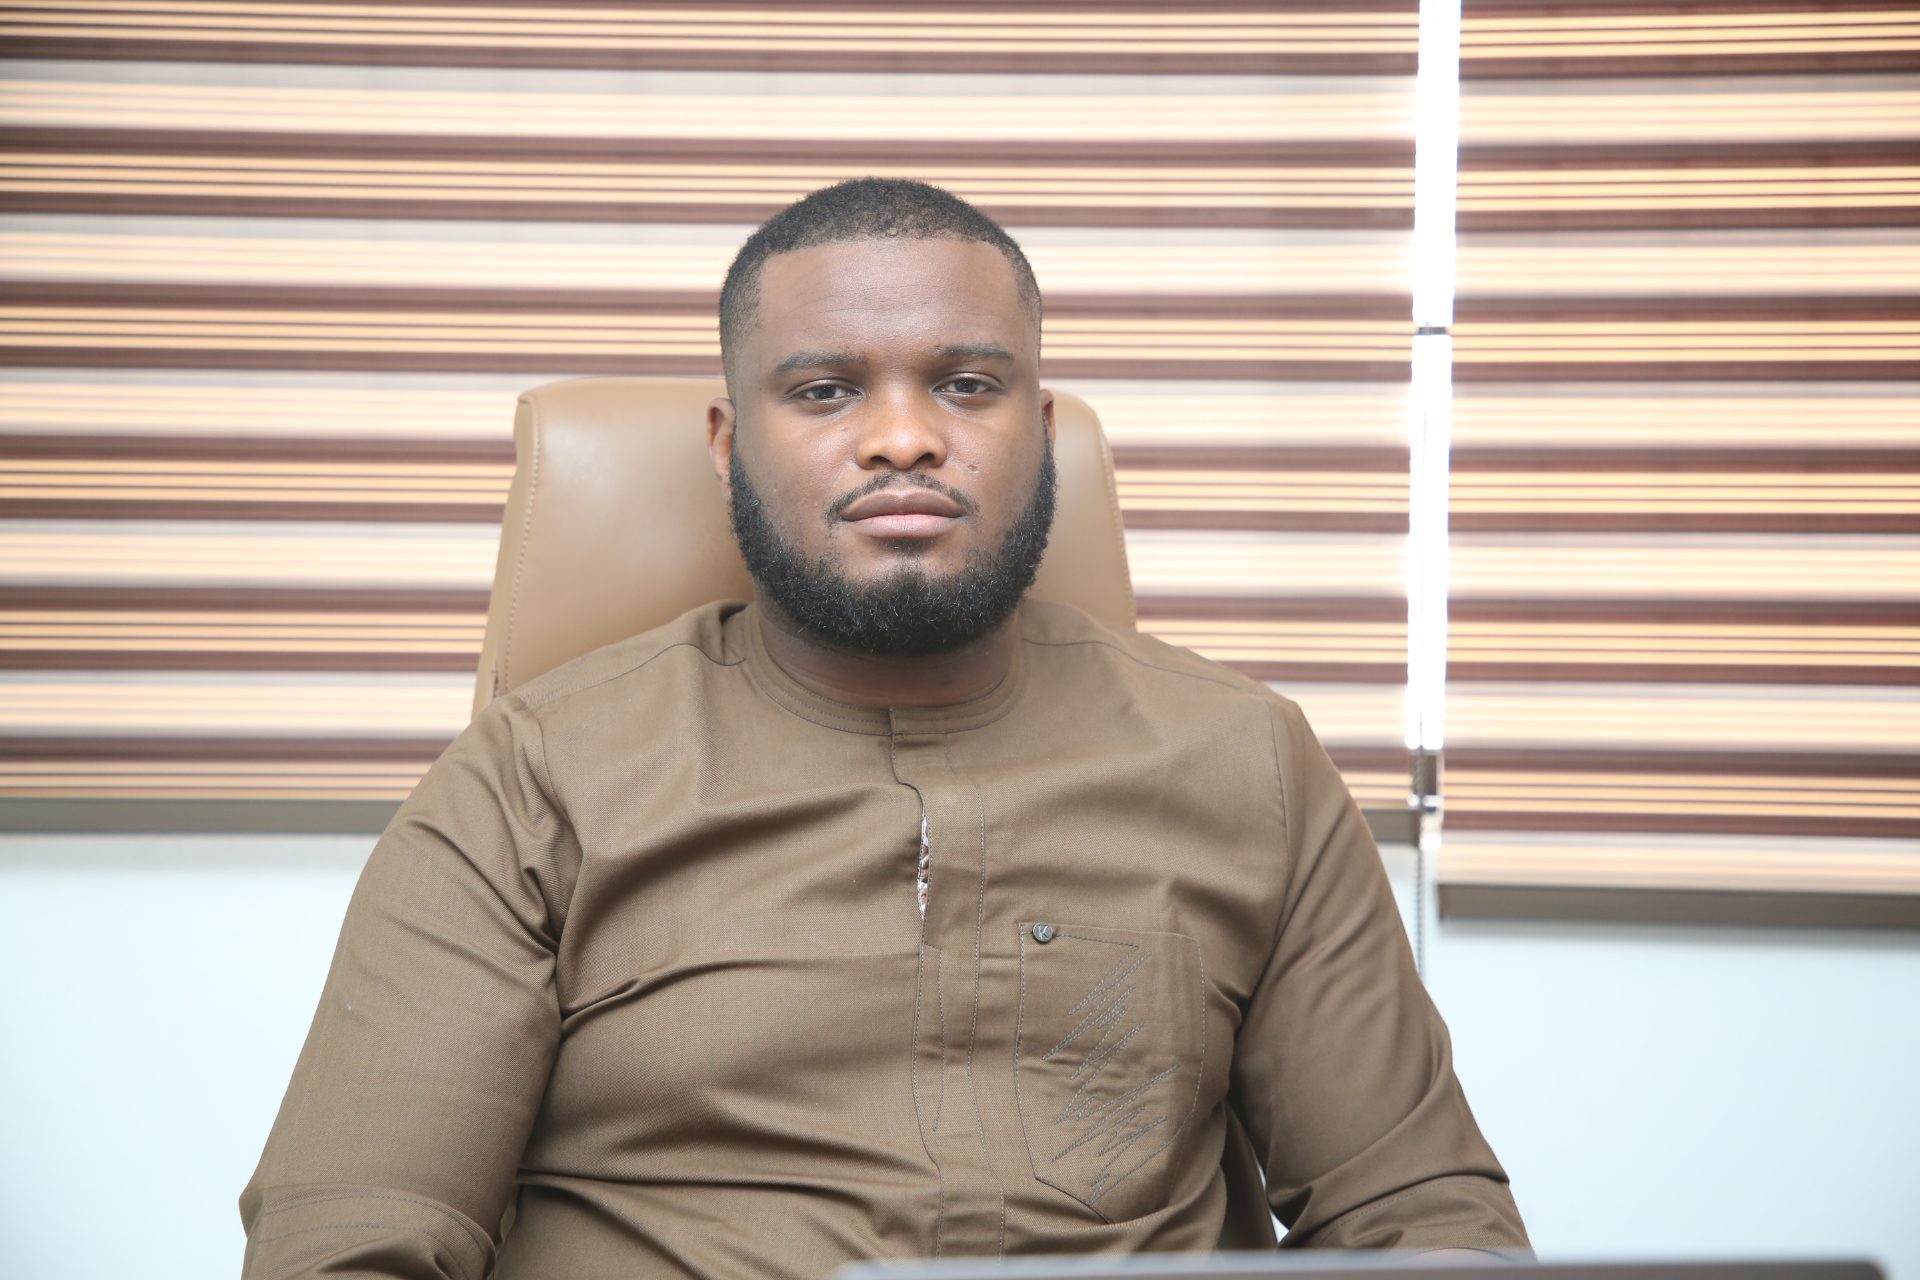 From coding at 13 to saving lives, meet Remedial Health's Samuel Okwuada